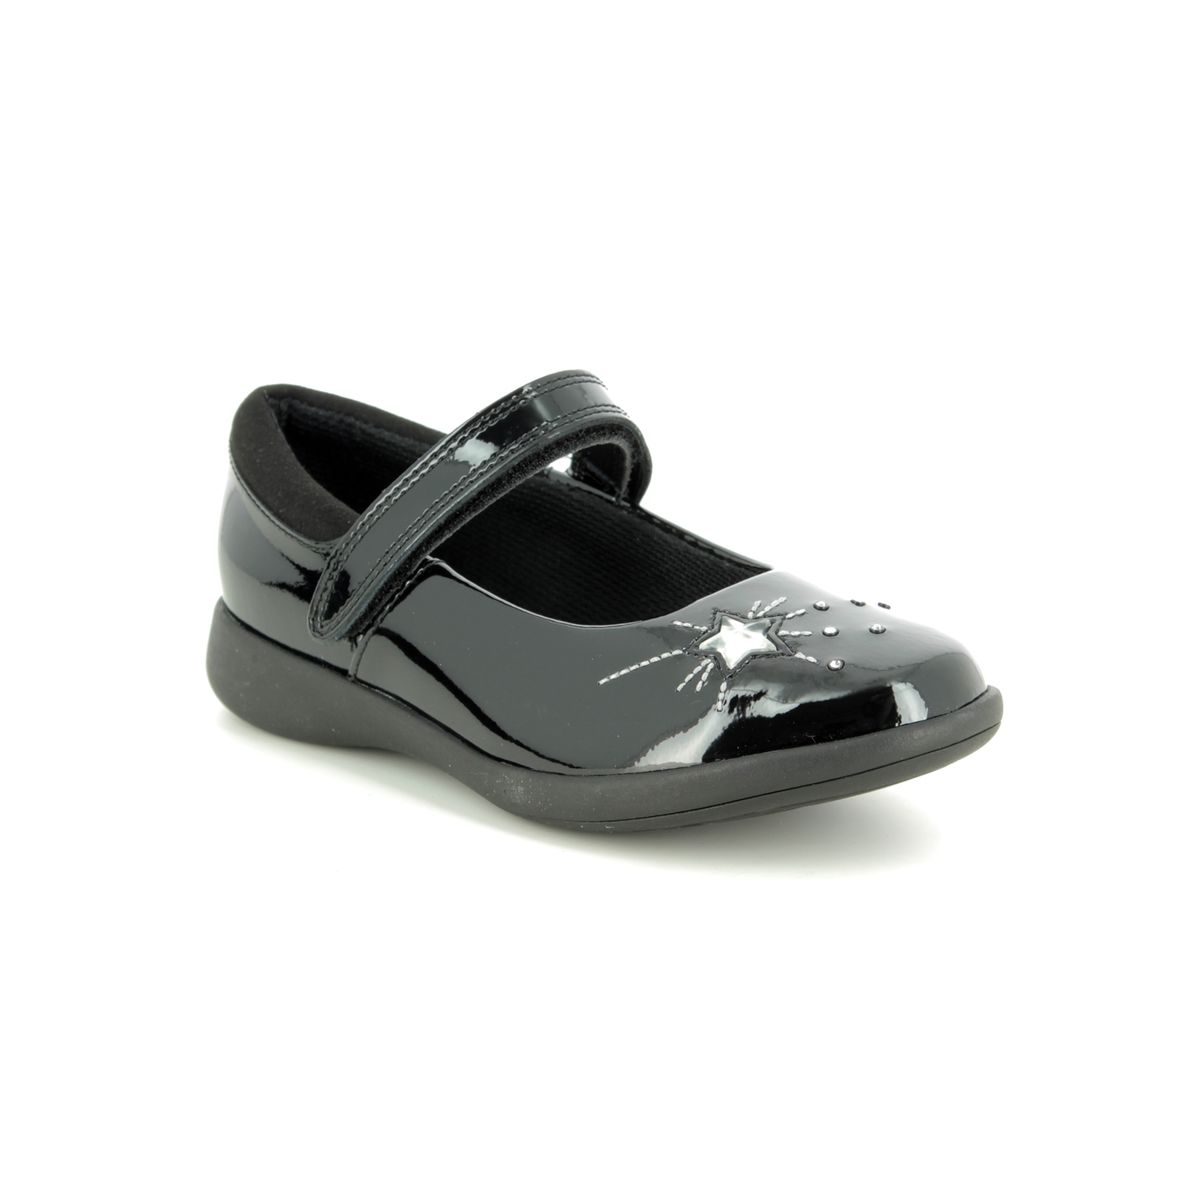 clarks childrens black patent shoes, Up 